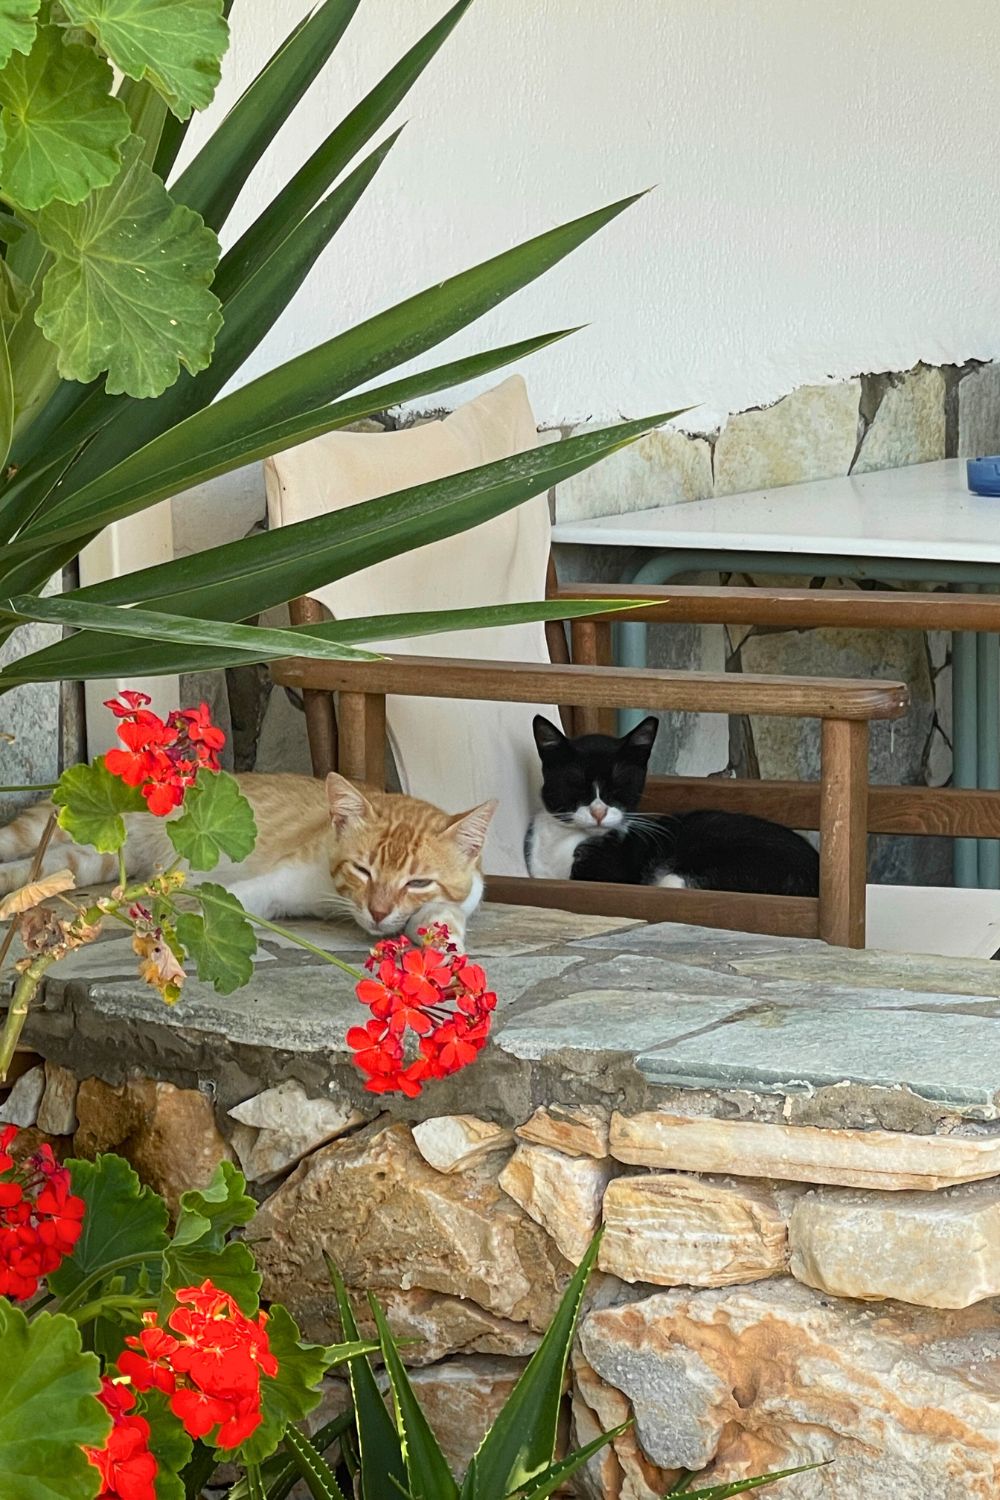 Two cats lounging peacefully on a stone bench surrounded by lush greenery and vibrant red flowers, a quaint scene on Sifnos island.